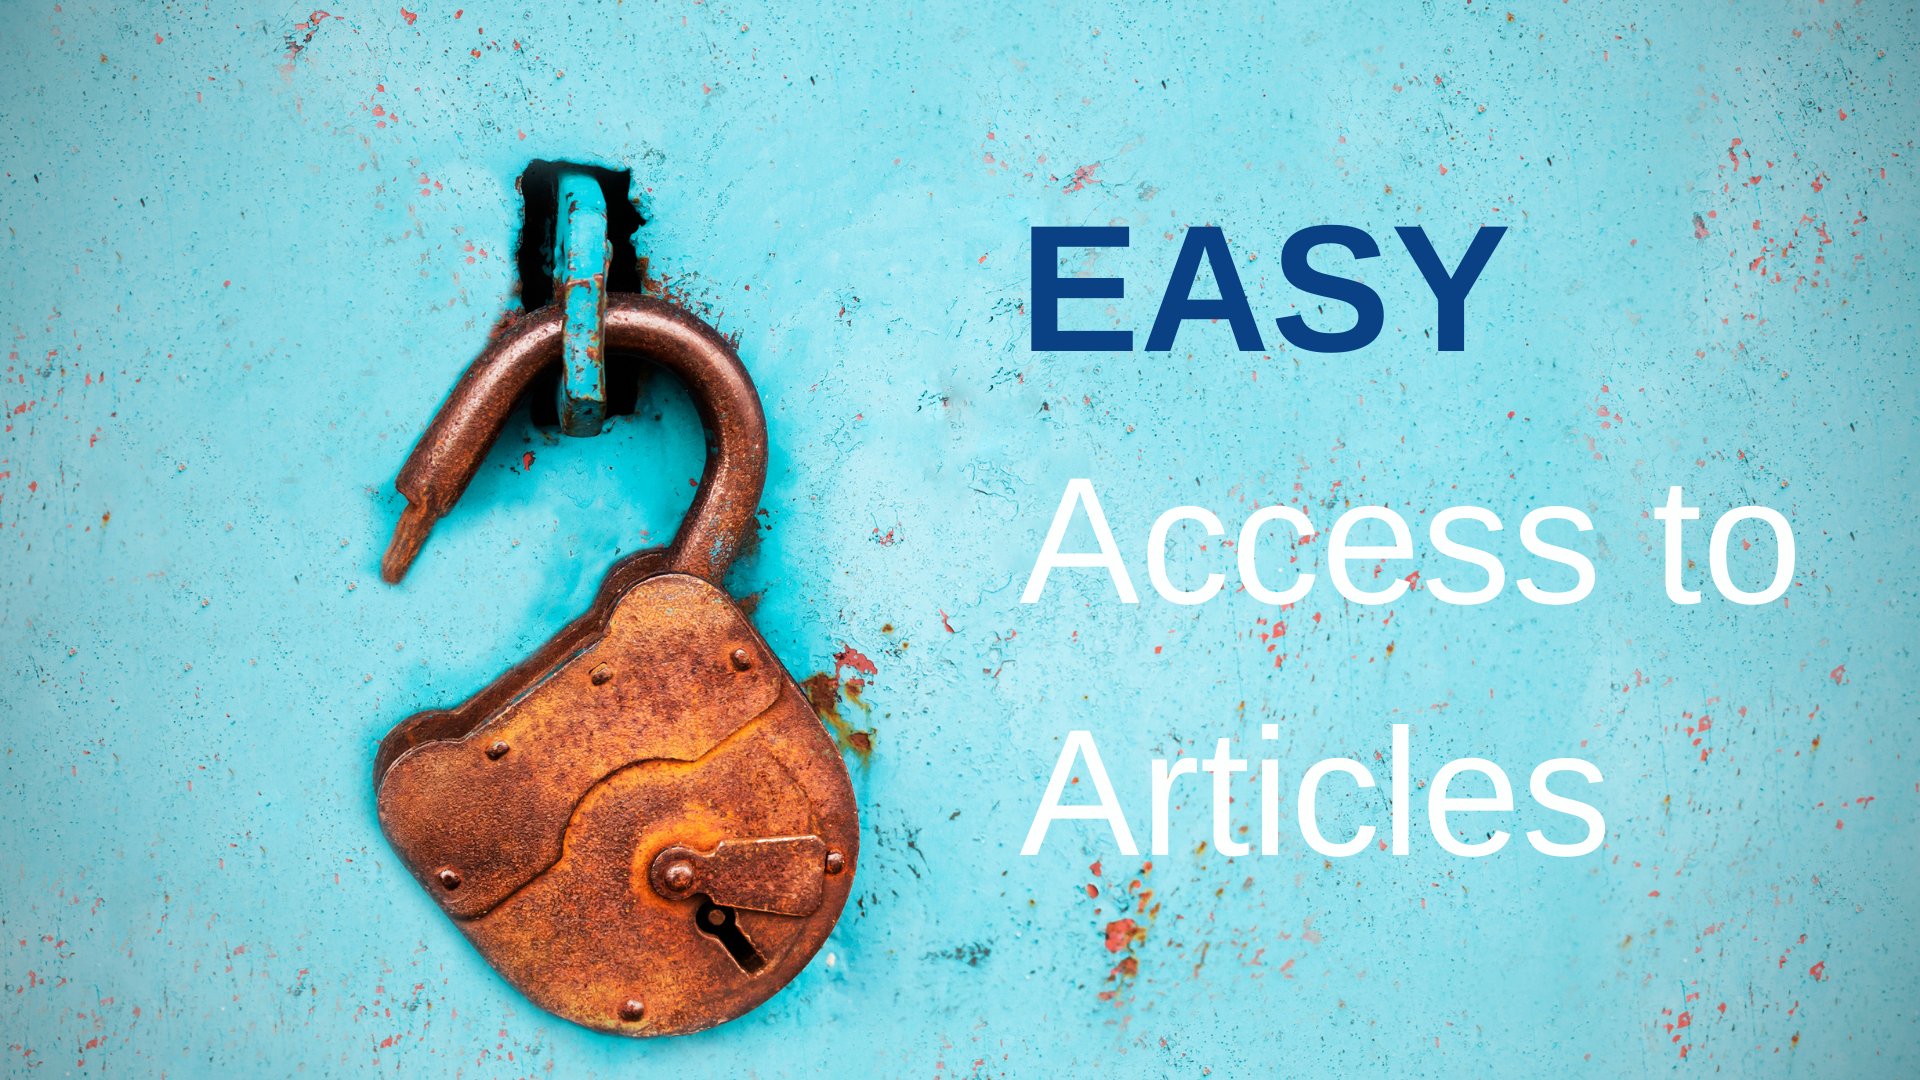 LibraryCRH on Twitter: "New Training Workshop - Easy Access to Articles 🥳  Learn how to gain easy access to full-text articles using LibKey Nomad. The  training workshop also covers how to access